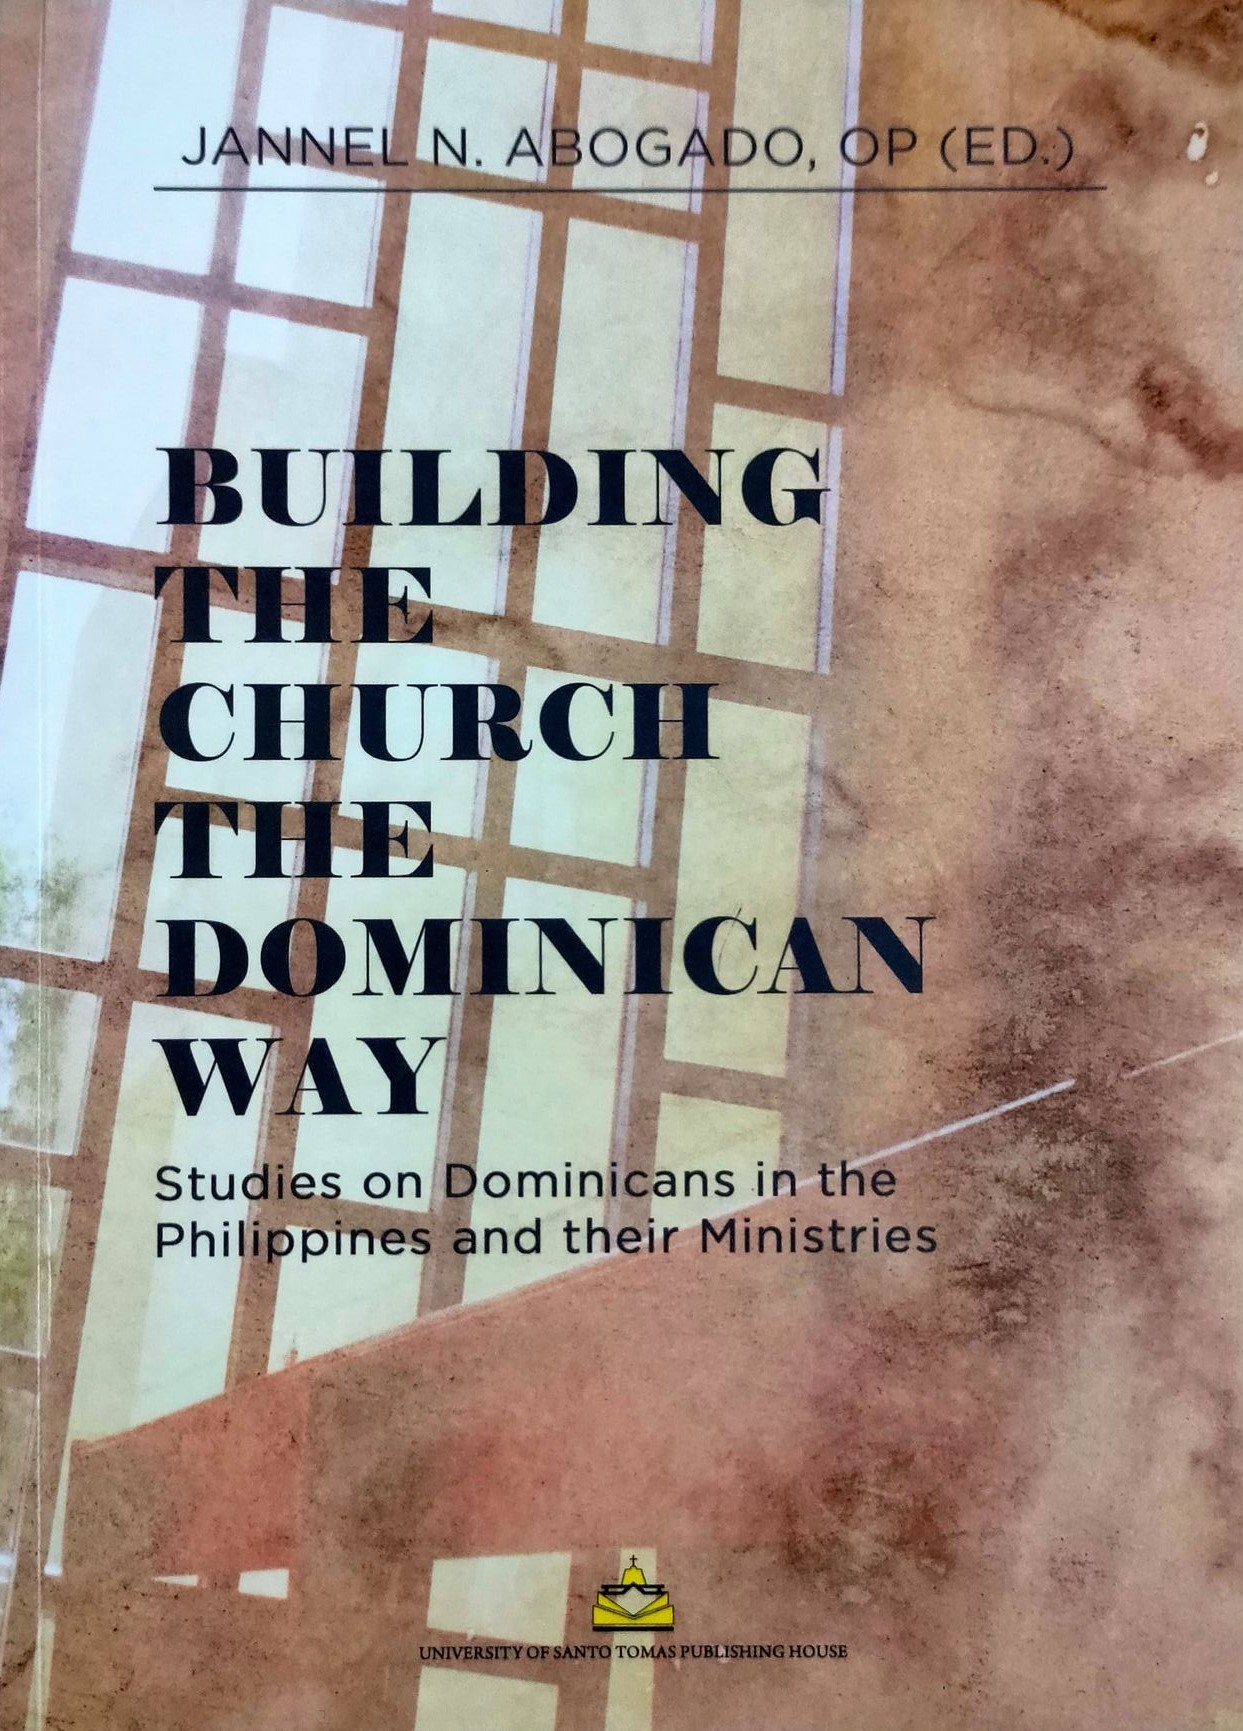 Building the church the Dominican way studies on Dominicans in the Philippines and their ministries